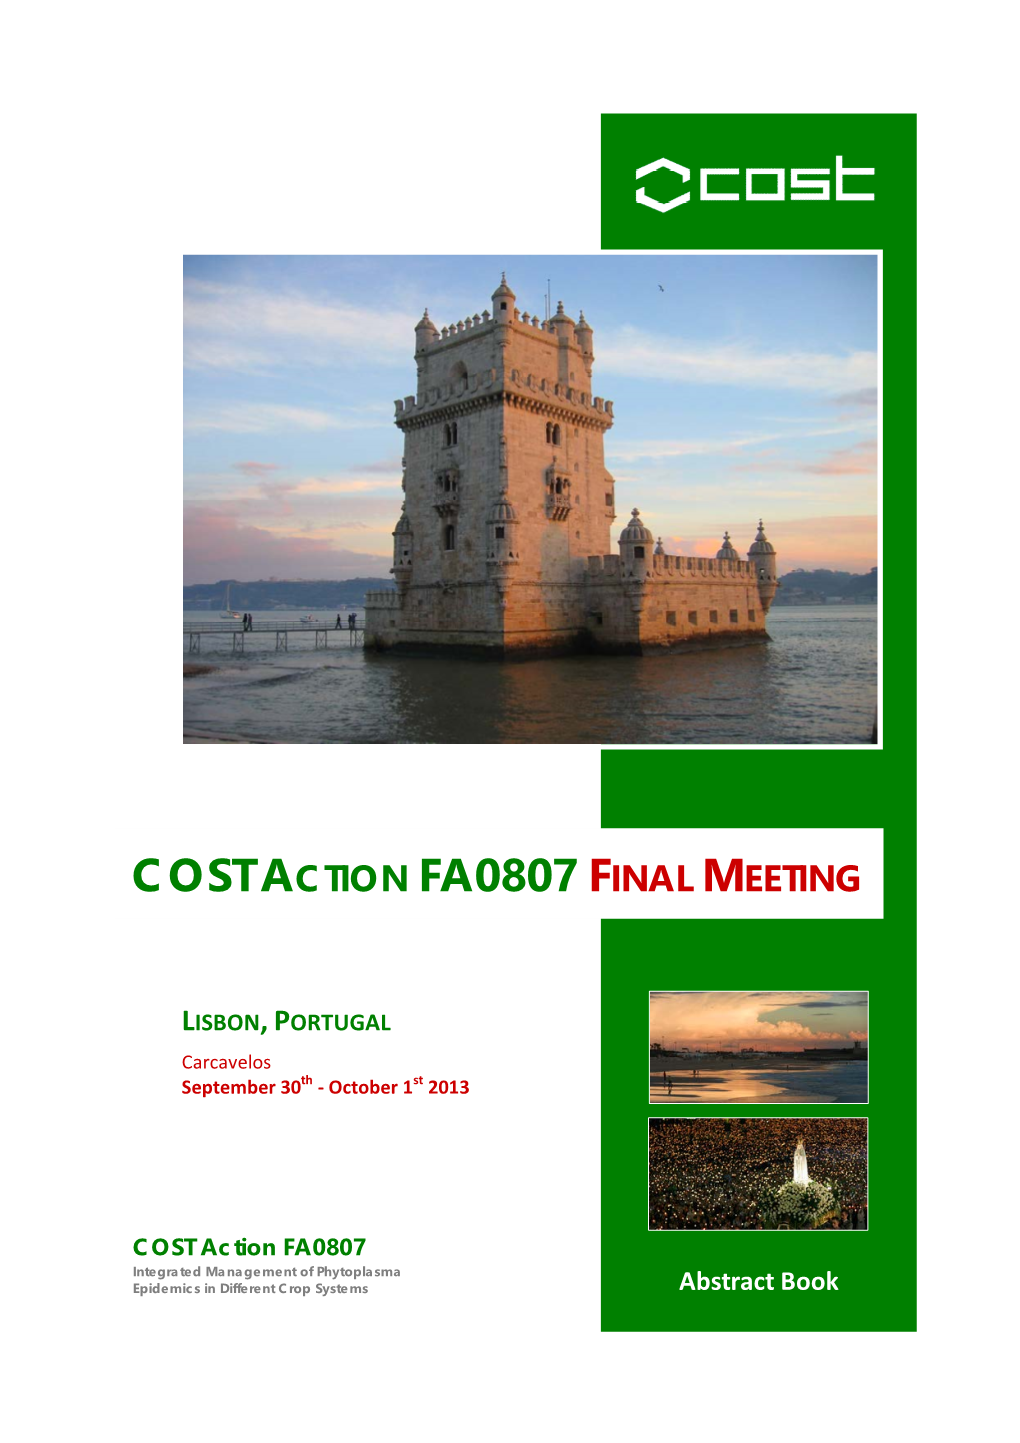 Cost Action Fa0807 Final Meeting